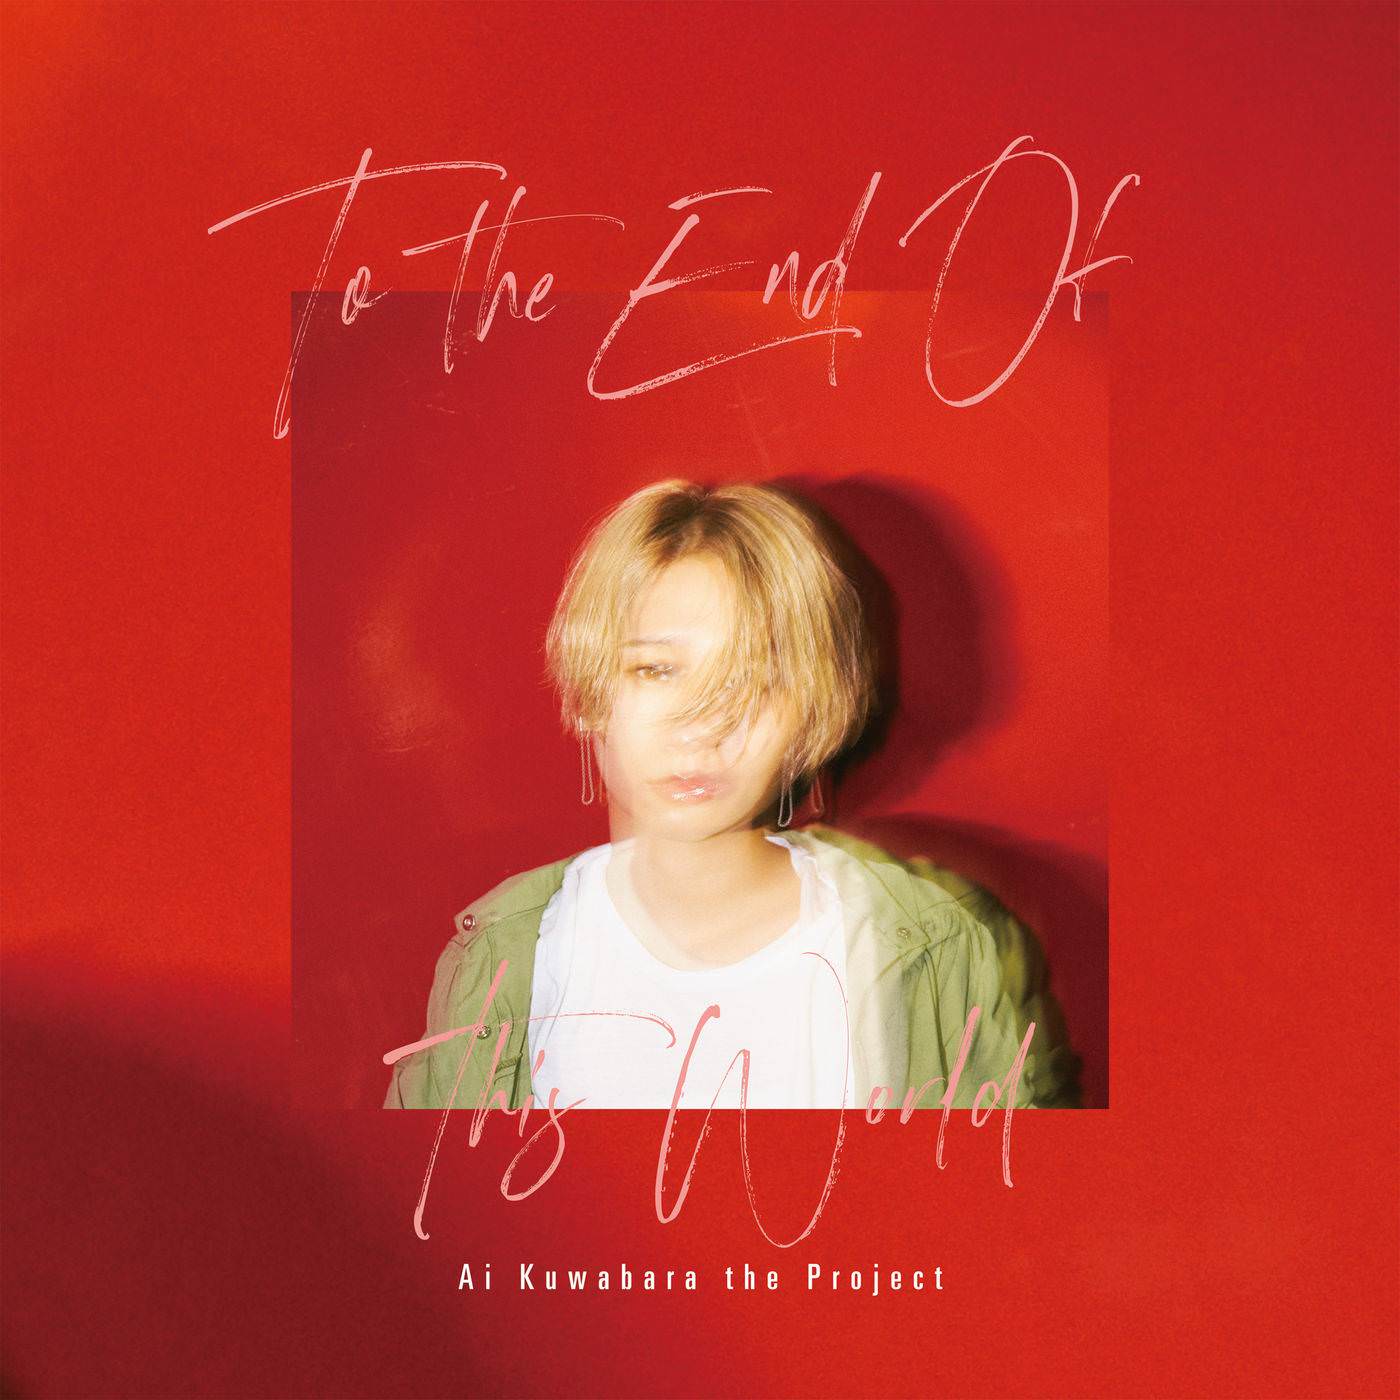 Ai Kuwabara The Project – To The End Of This World (2018) [FLAC 24bit/96kHz]